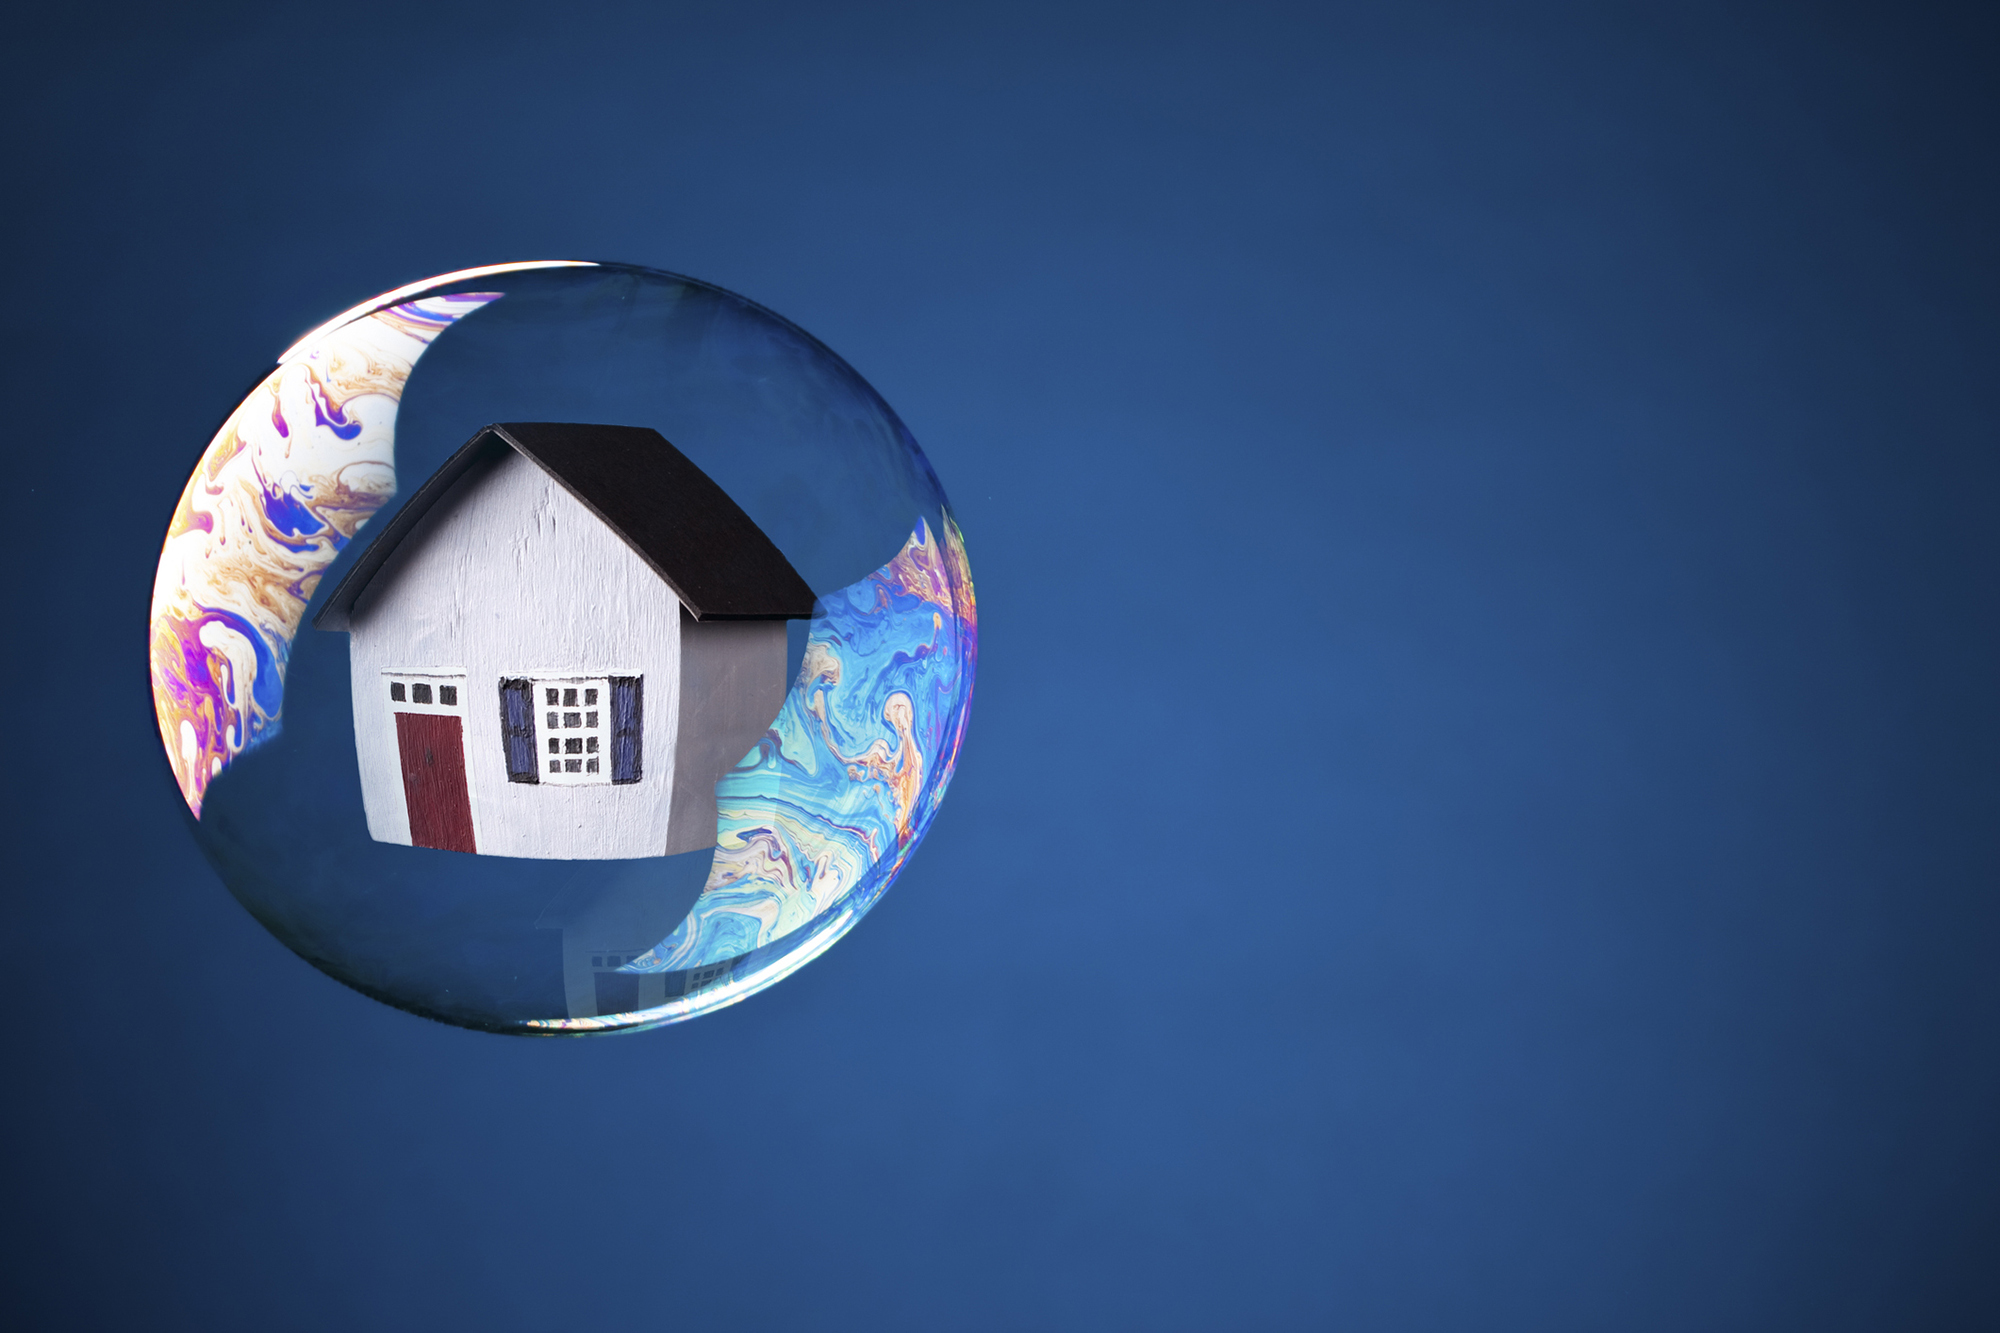 computer generated image of house in a bubble.